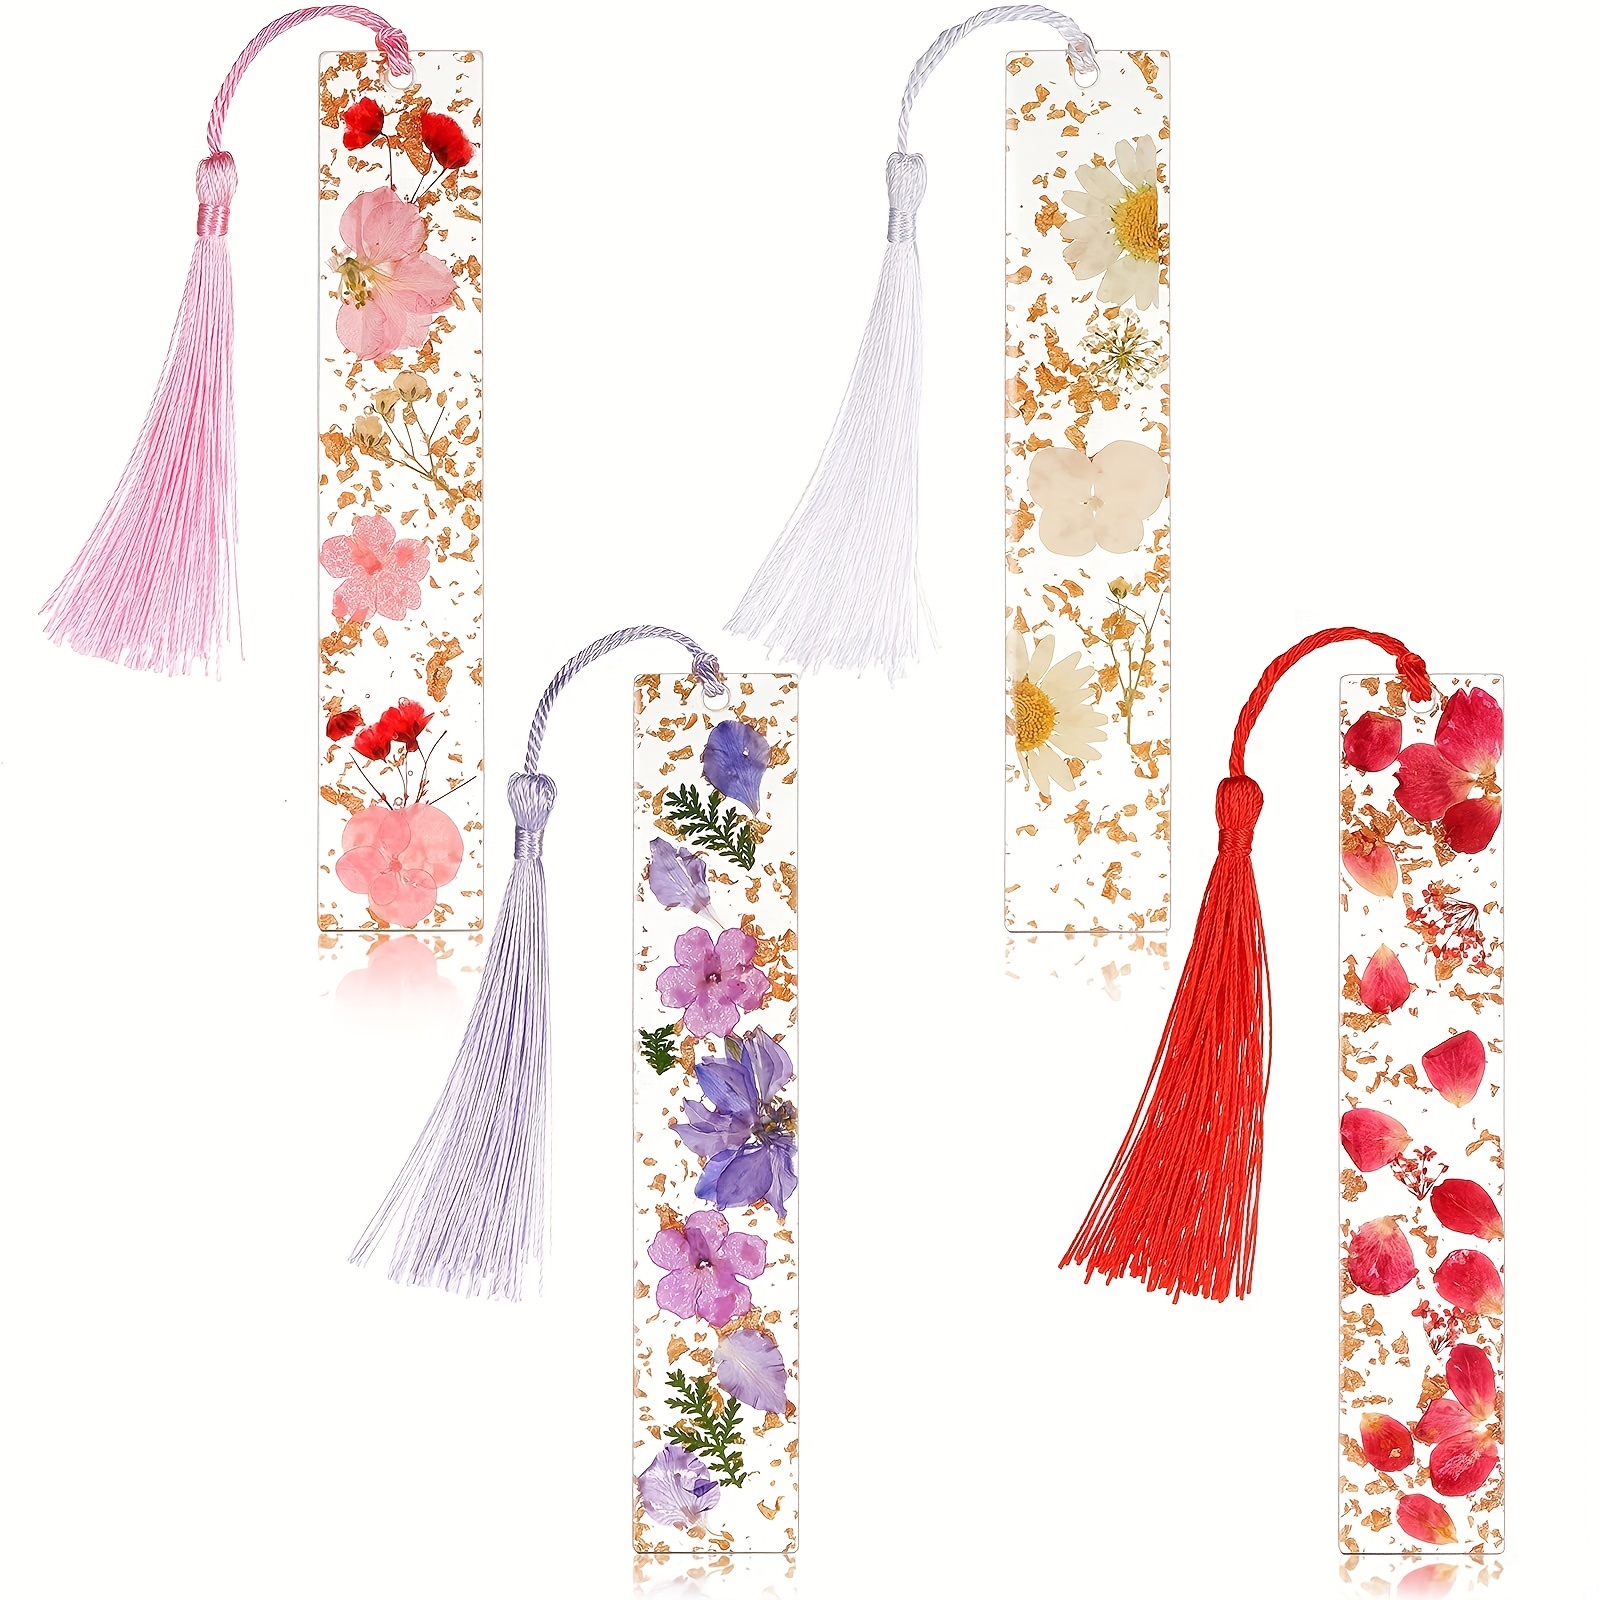  30PCS Transparent Dried Flower Bookmarks, Flower Bookmark  Maker, Handmade DIY Dried Flower Bookmark, Clear Floral Bookmark, Herbarium  Bookmarks Transparent Floral Page : Office Products